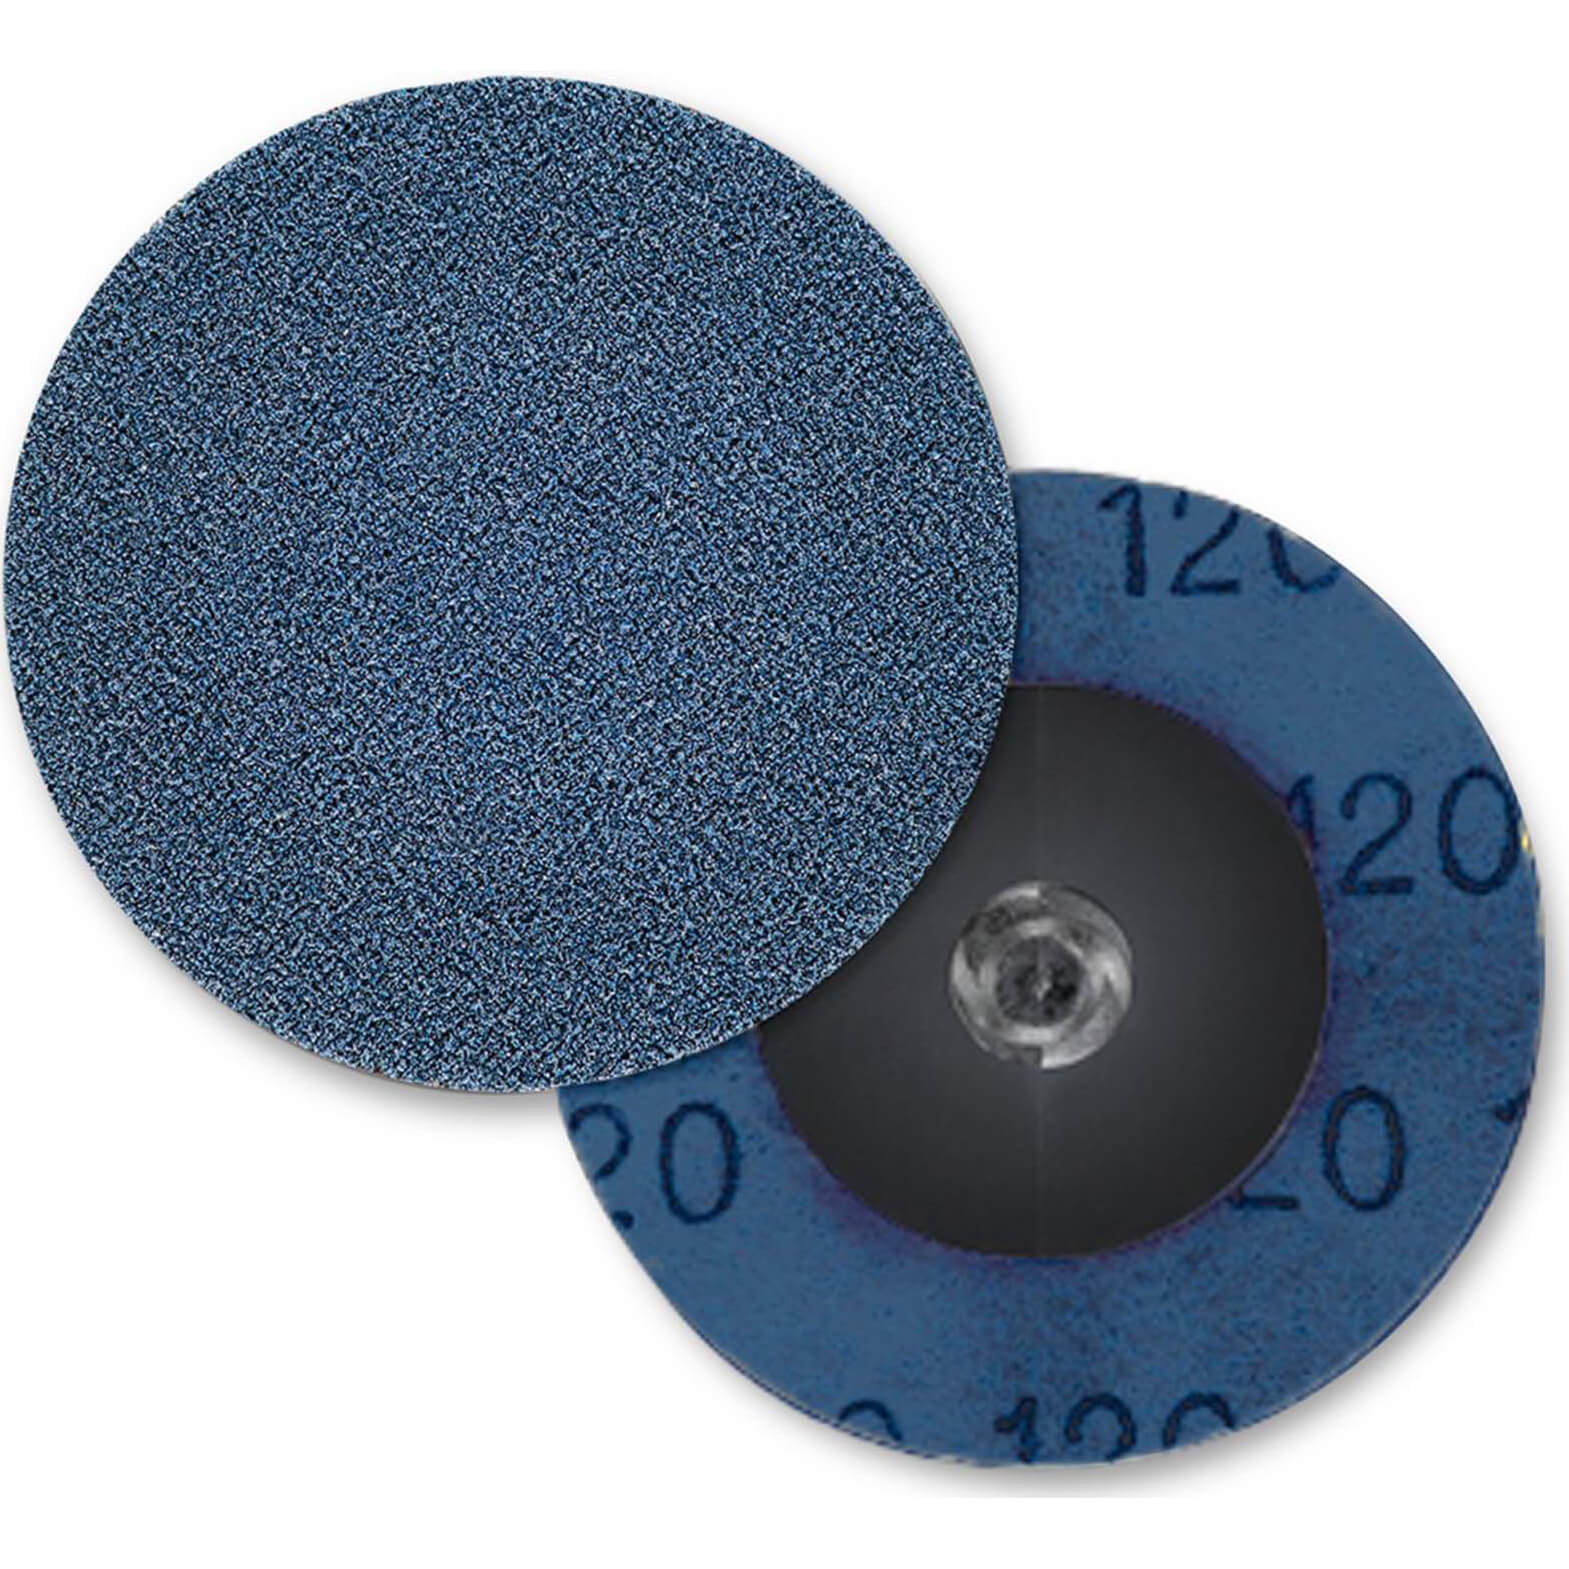 Photo of Sia 2820 Siamet X Quick Change Abrasives Discs 50mm 240g Pack Of 50